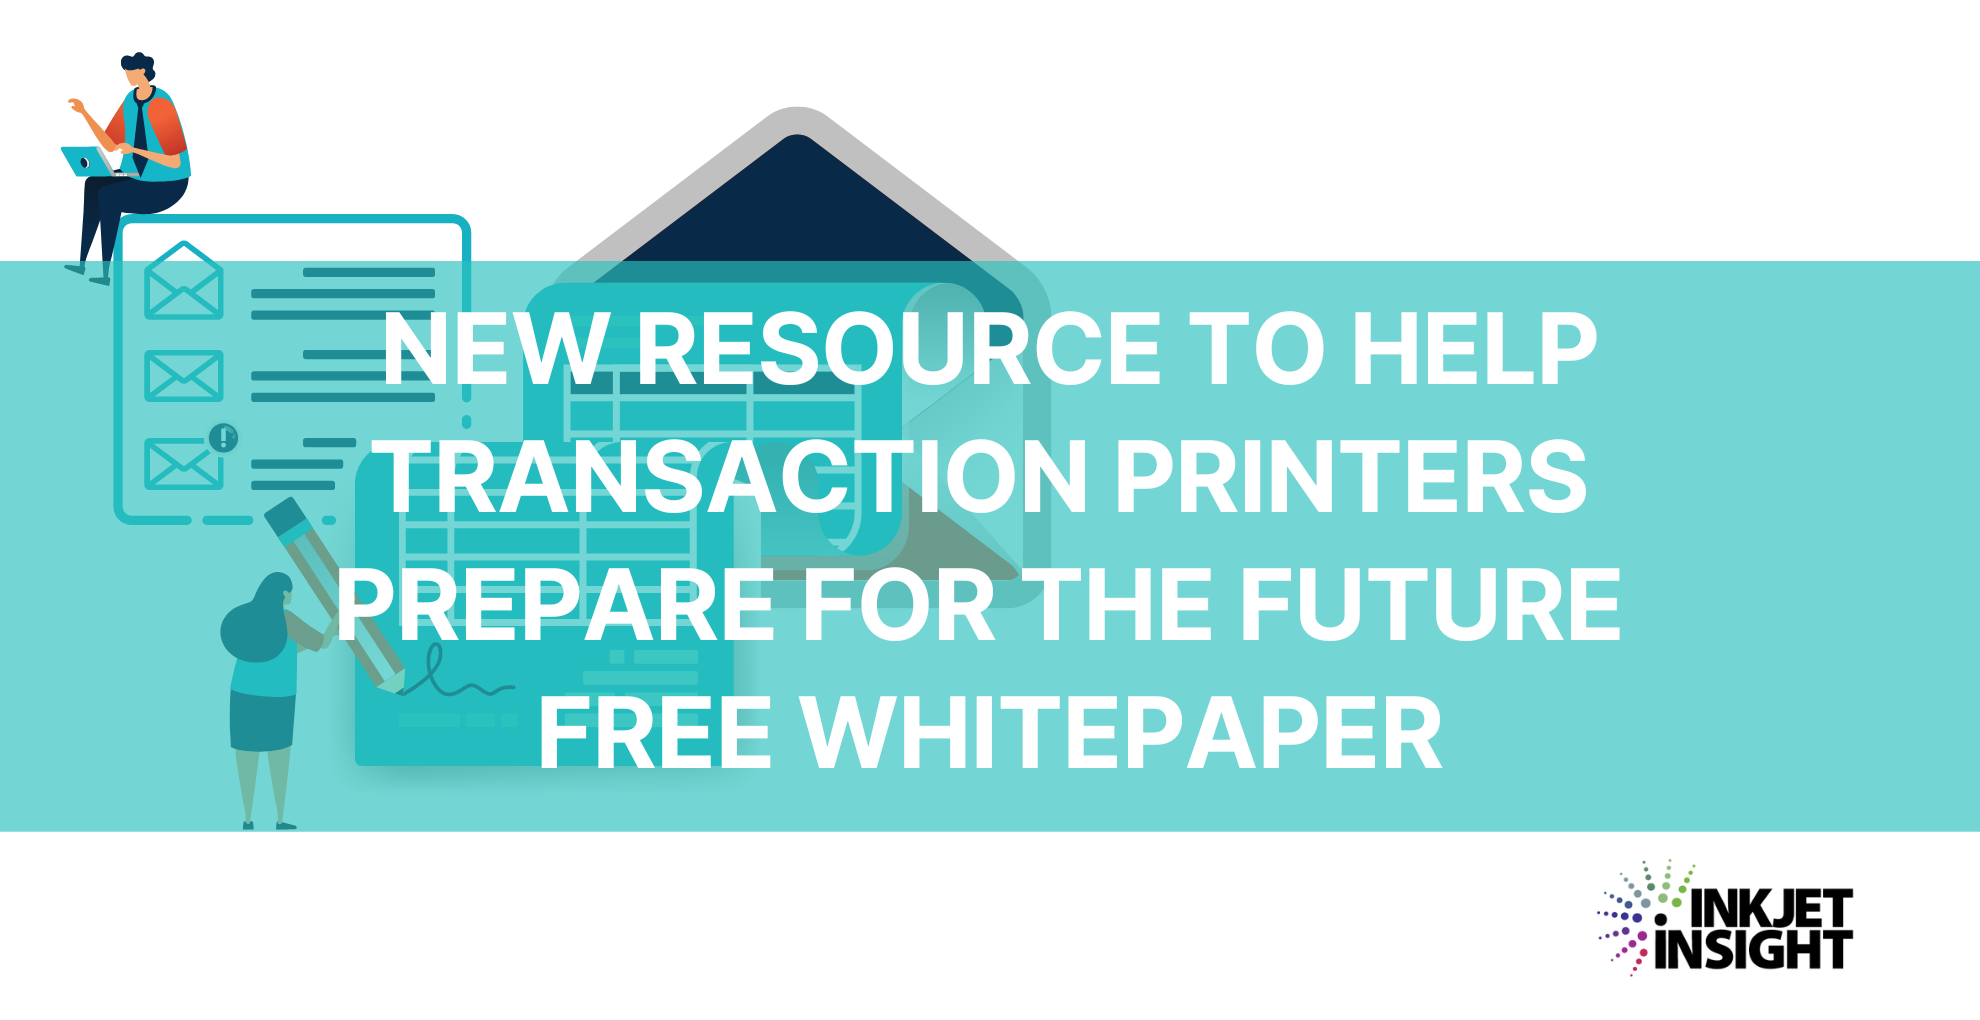 Featured image for “New Resource to Help Transaction Printers Prepare for the Future – Free Whitepaper”